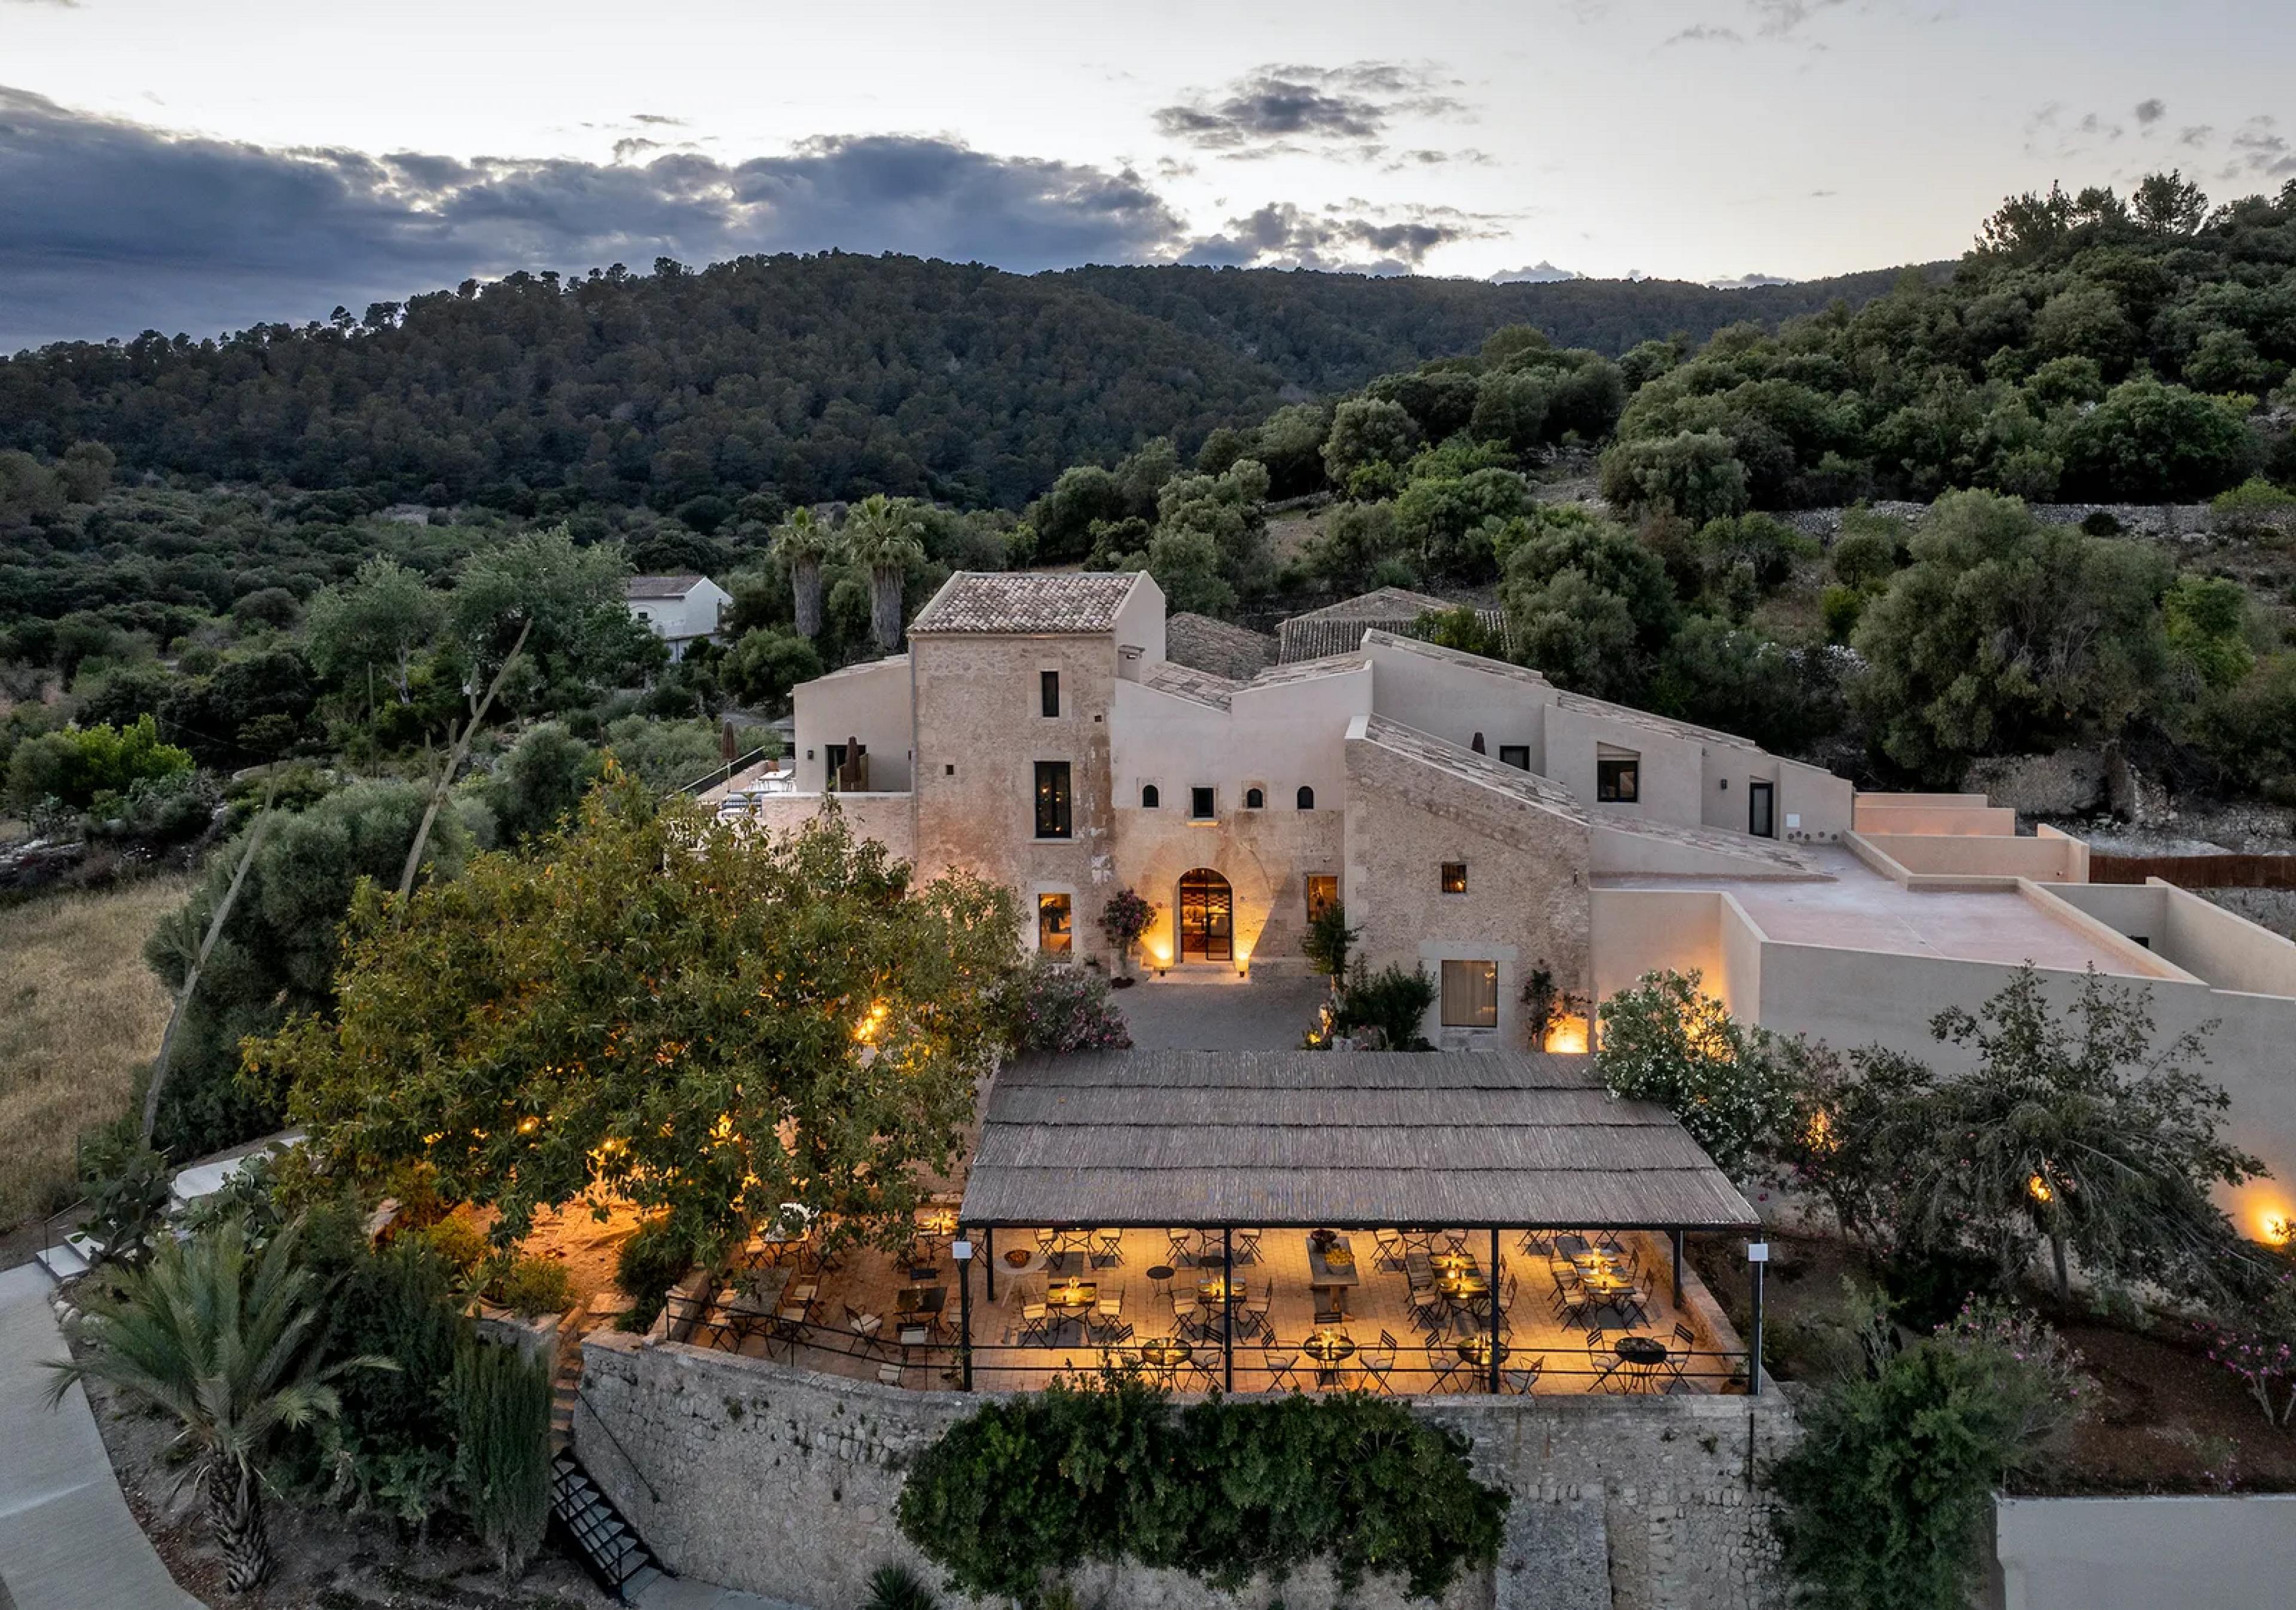 mediterranean-climate hill with multi-story stone / stucco hotel building seen from above at dusk with a terrace in front lit up for dinner